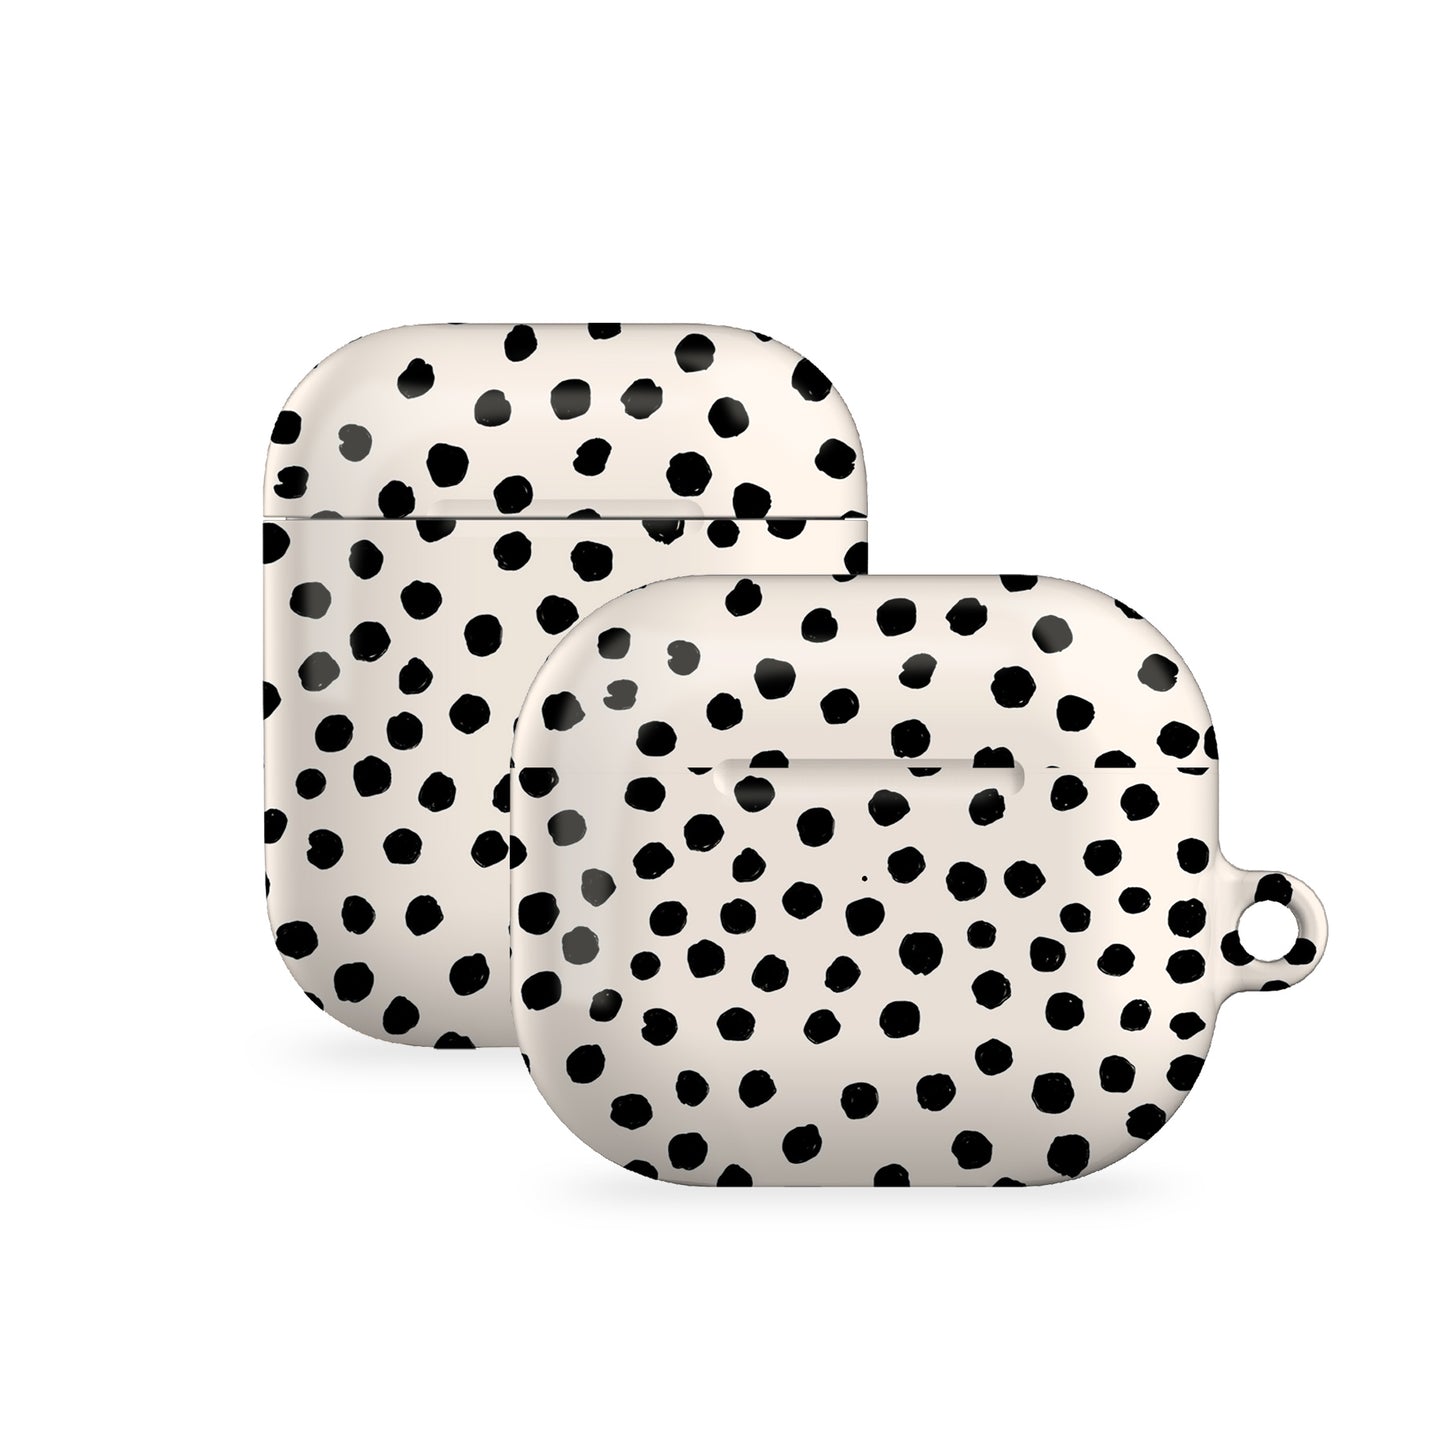 Painted Dots AirPods Case Cover